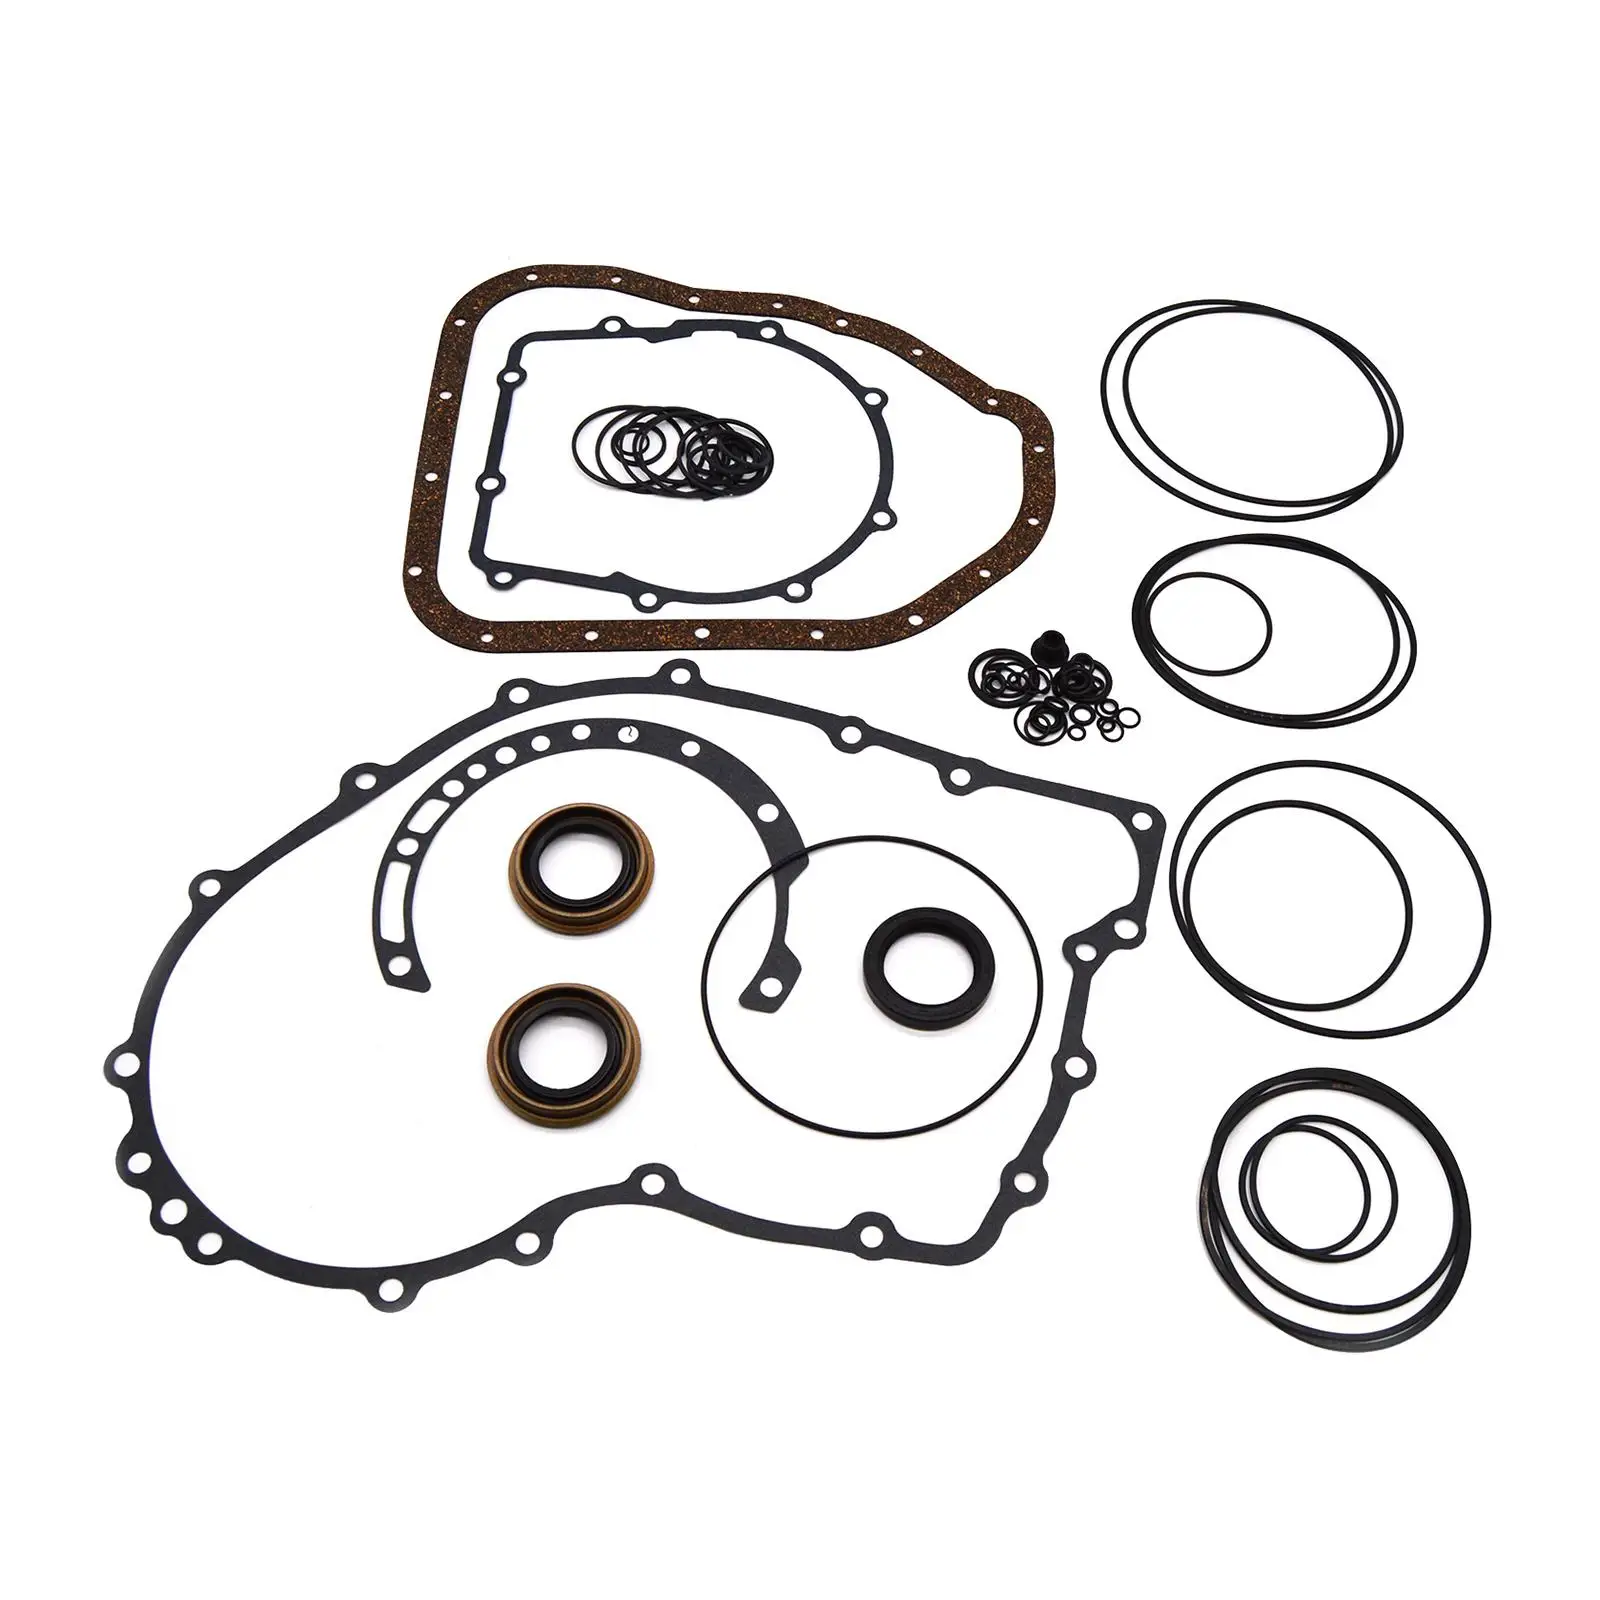 

Auto Transmission Master Rebuild Kit Overhaul Fits for K2/K3 Replace ACC Parts A4CF1